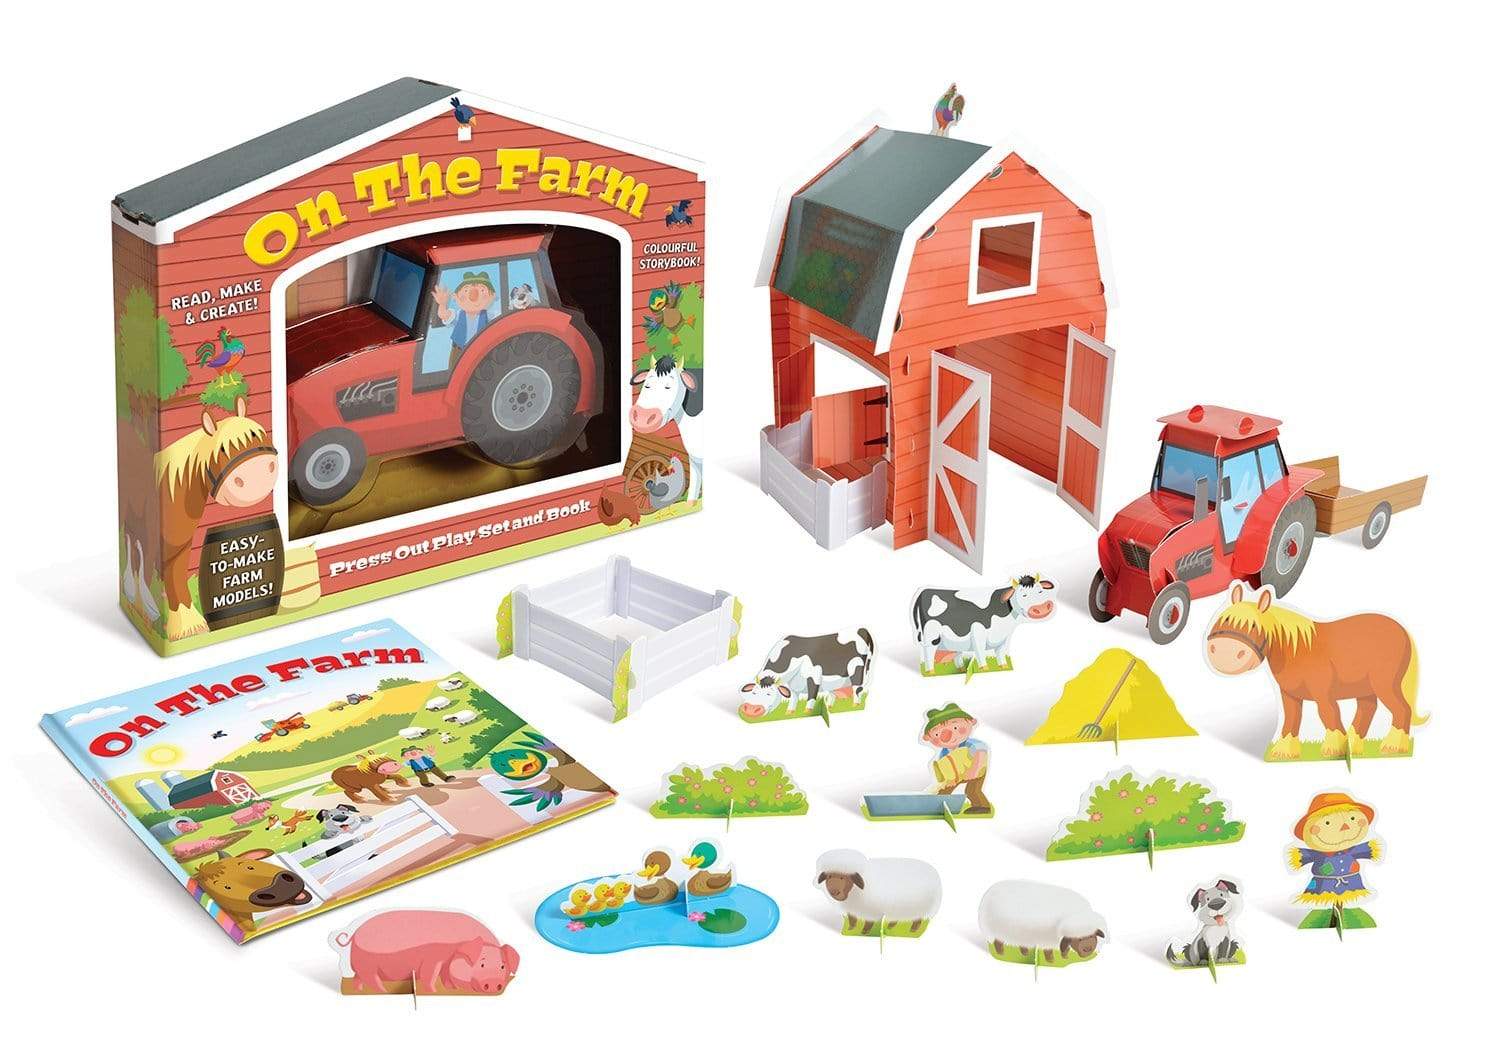 On The Farm (Junior Press Out and Build Gift Box)